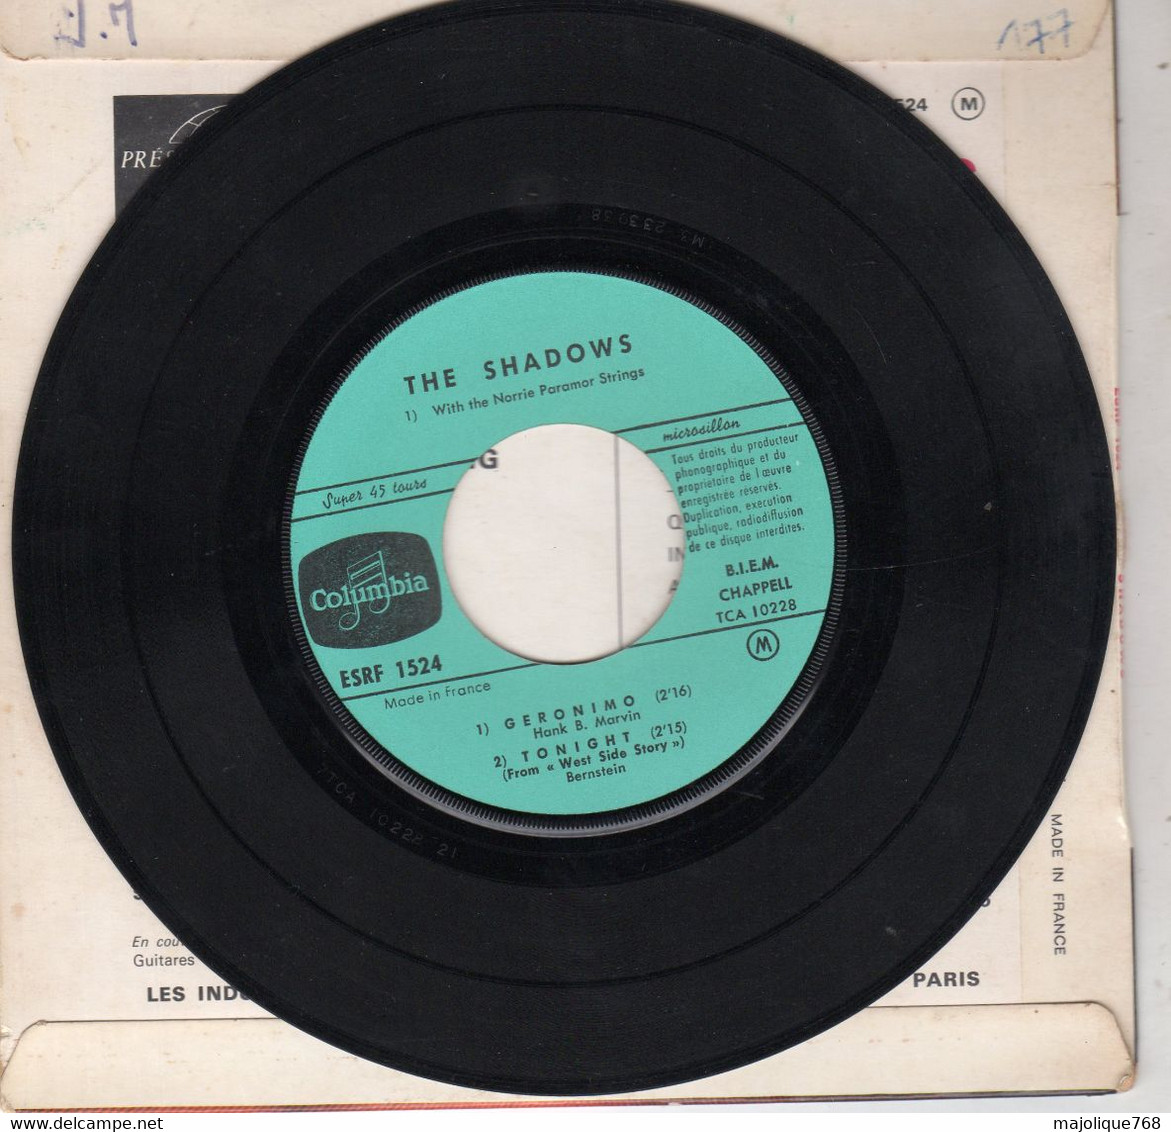 Disque The Shadows  - Theme For Young Lovers - French Dressing - Columbia ESDF 1524 France 1964 - Instrumental